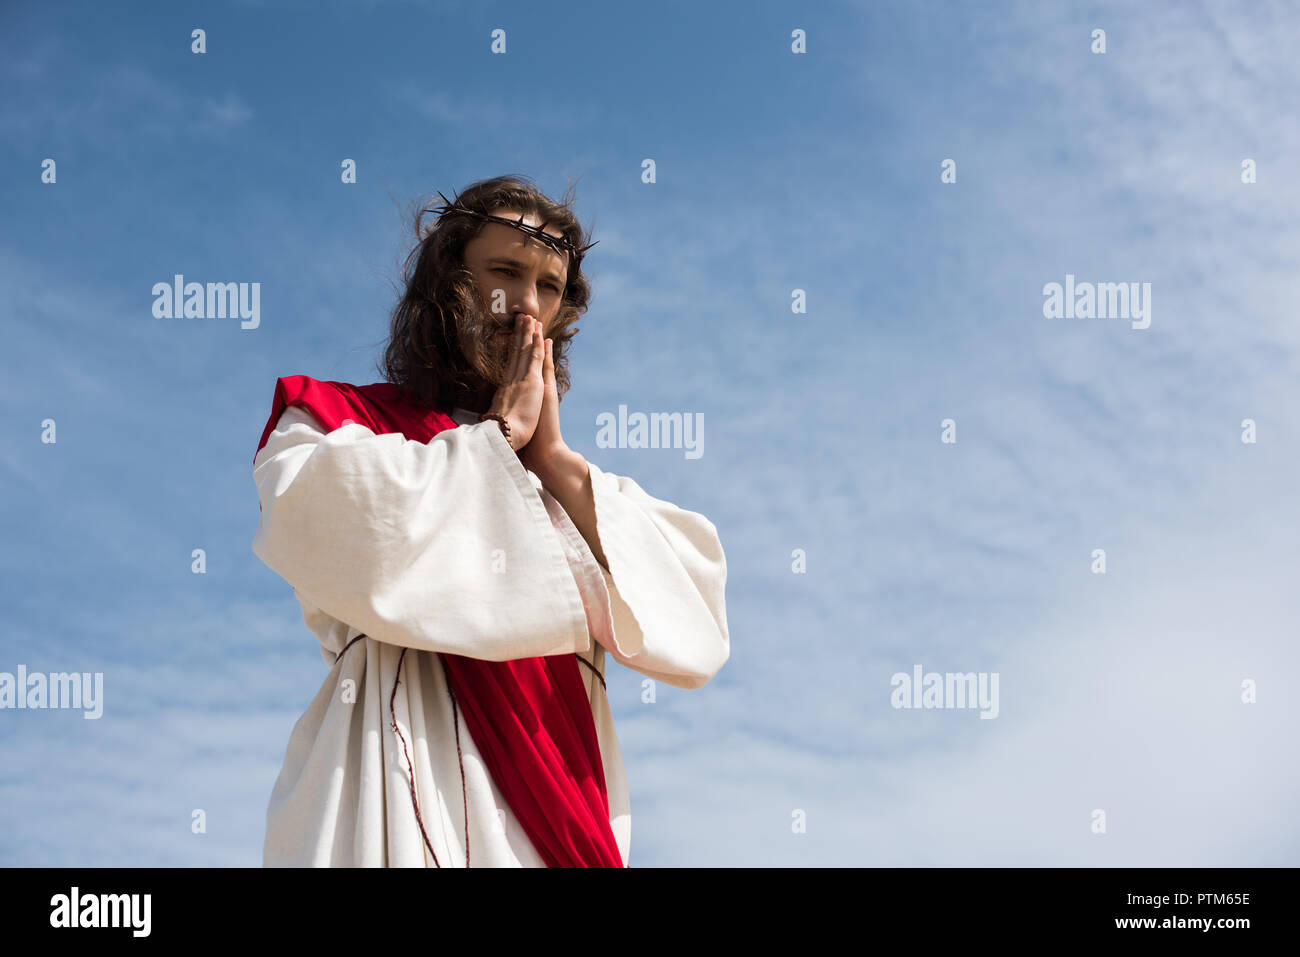 low angle view of Jesus in robe and red sash praying against blue sky Stock Photo